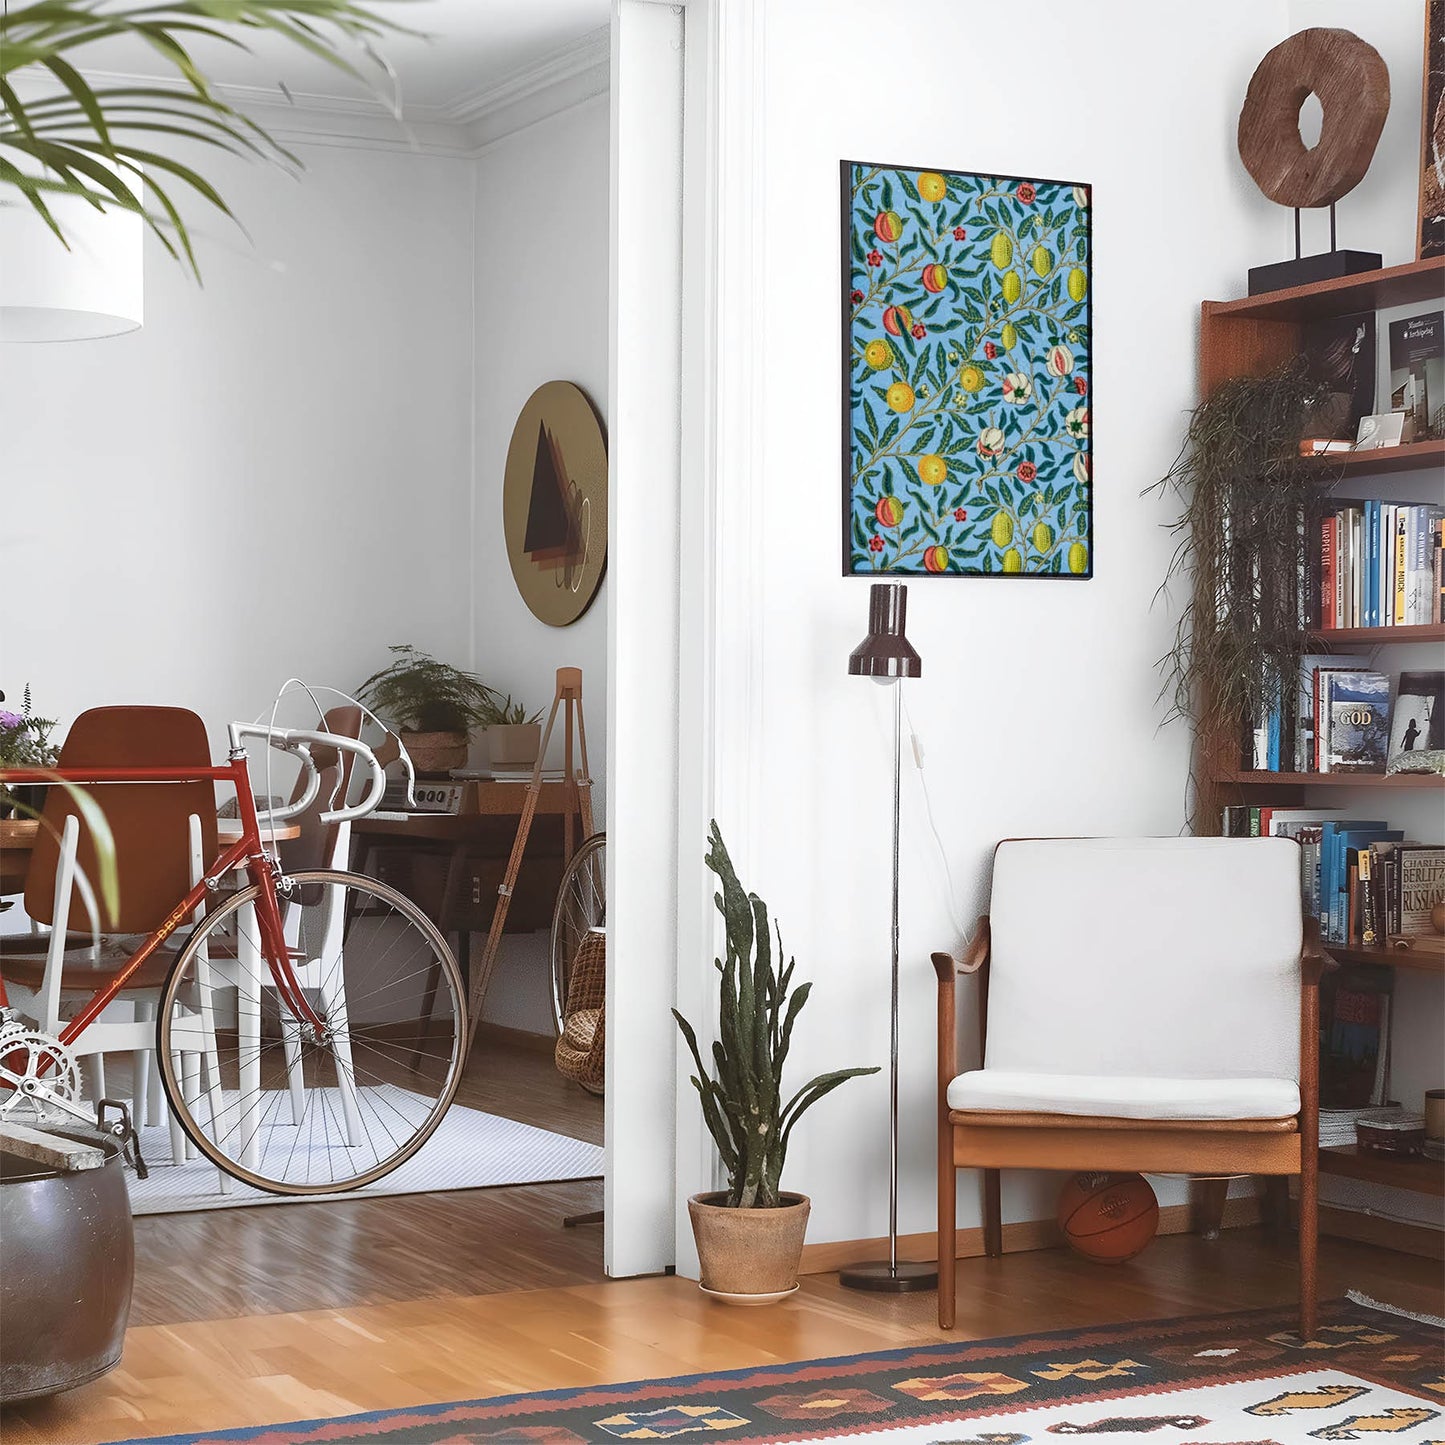 Eclectic living room with a road bike, bookshelf and house plants that features framed artwork of a Lemons above a chair and lamp